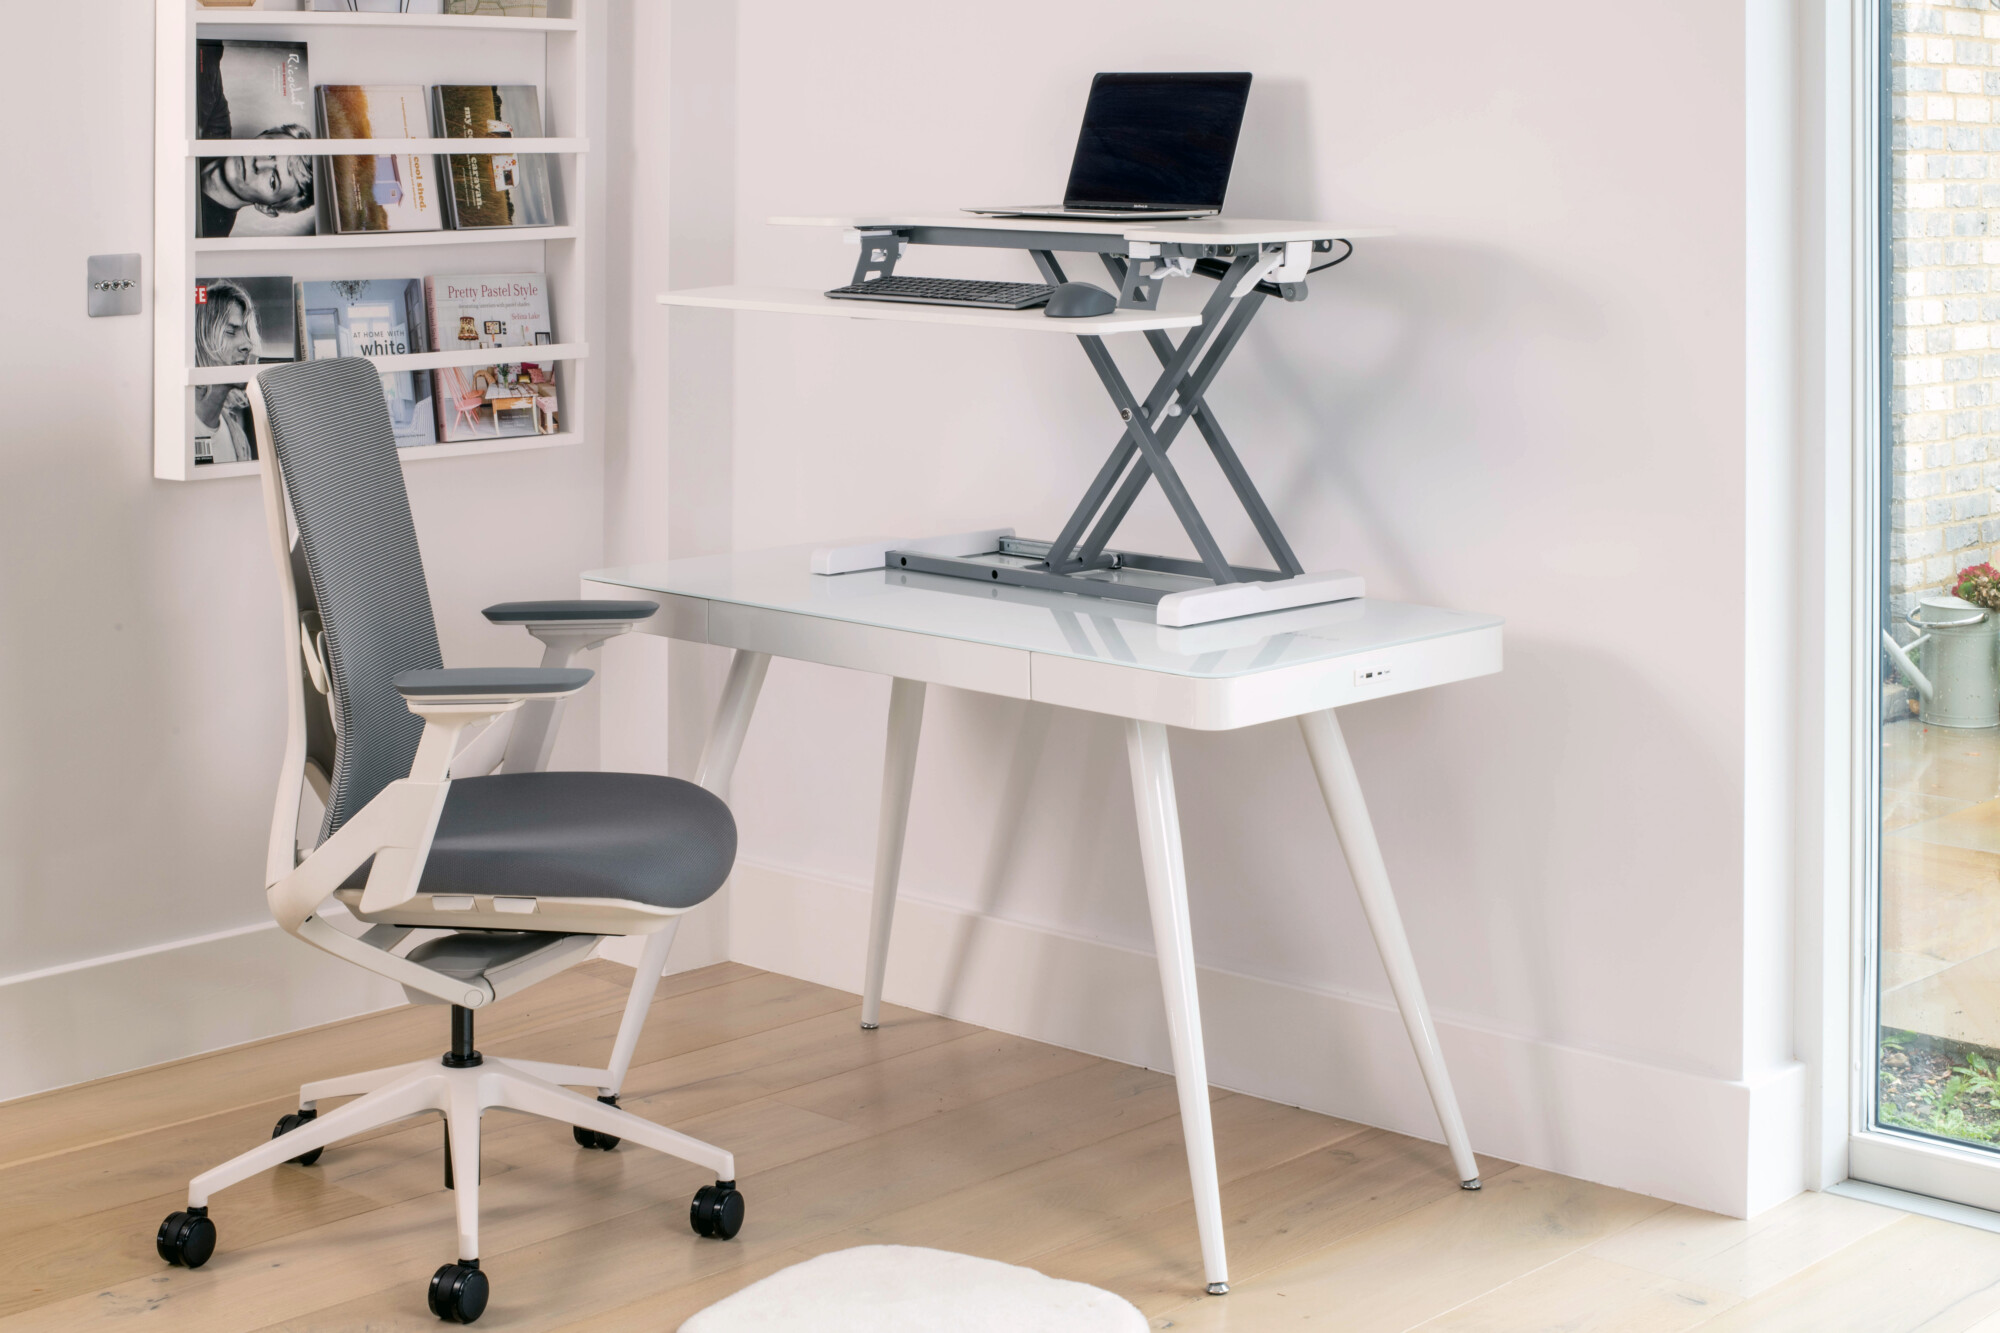 White glass top smart desk with a grey and white mesh ergonomic chair. The smart desk also features a white standing desk converter. 